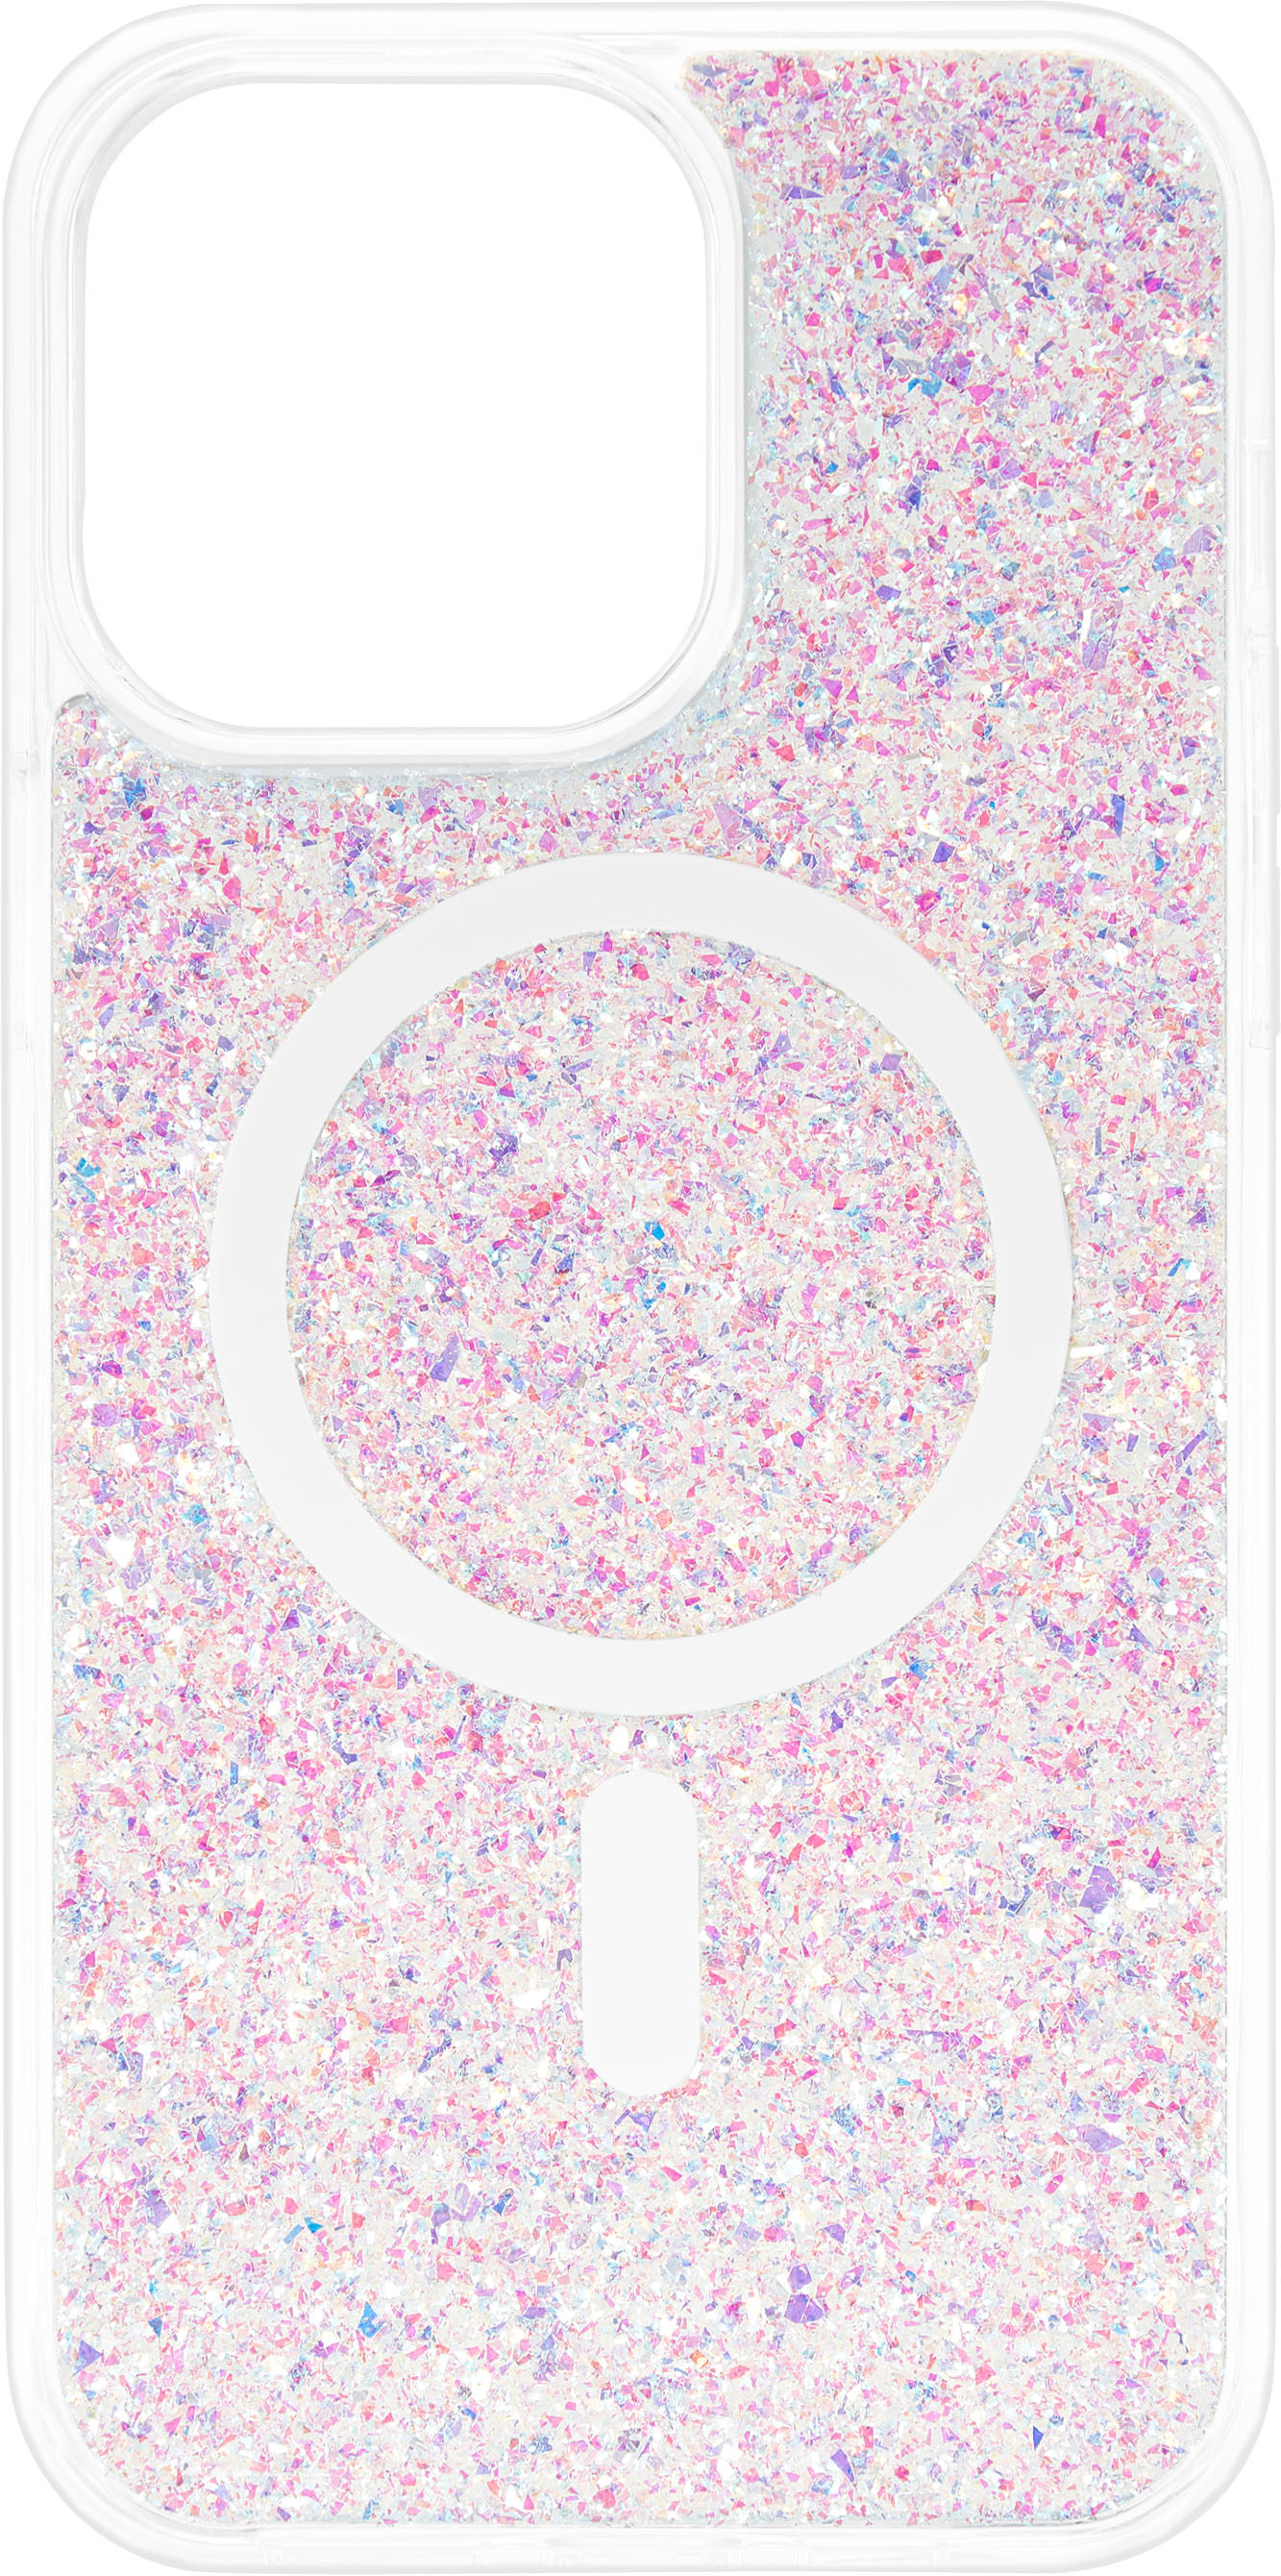 Insignia™ Hard Shell Case for iPhone 13 Gradient Rose Gold Glitter